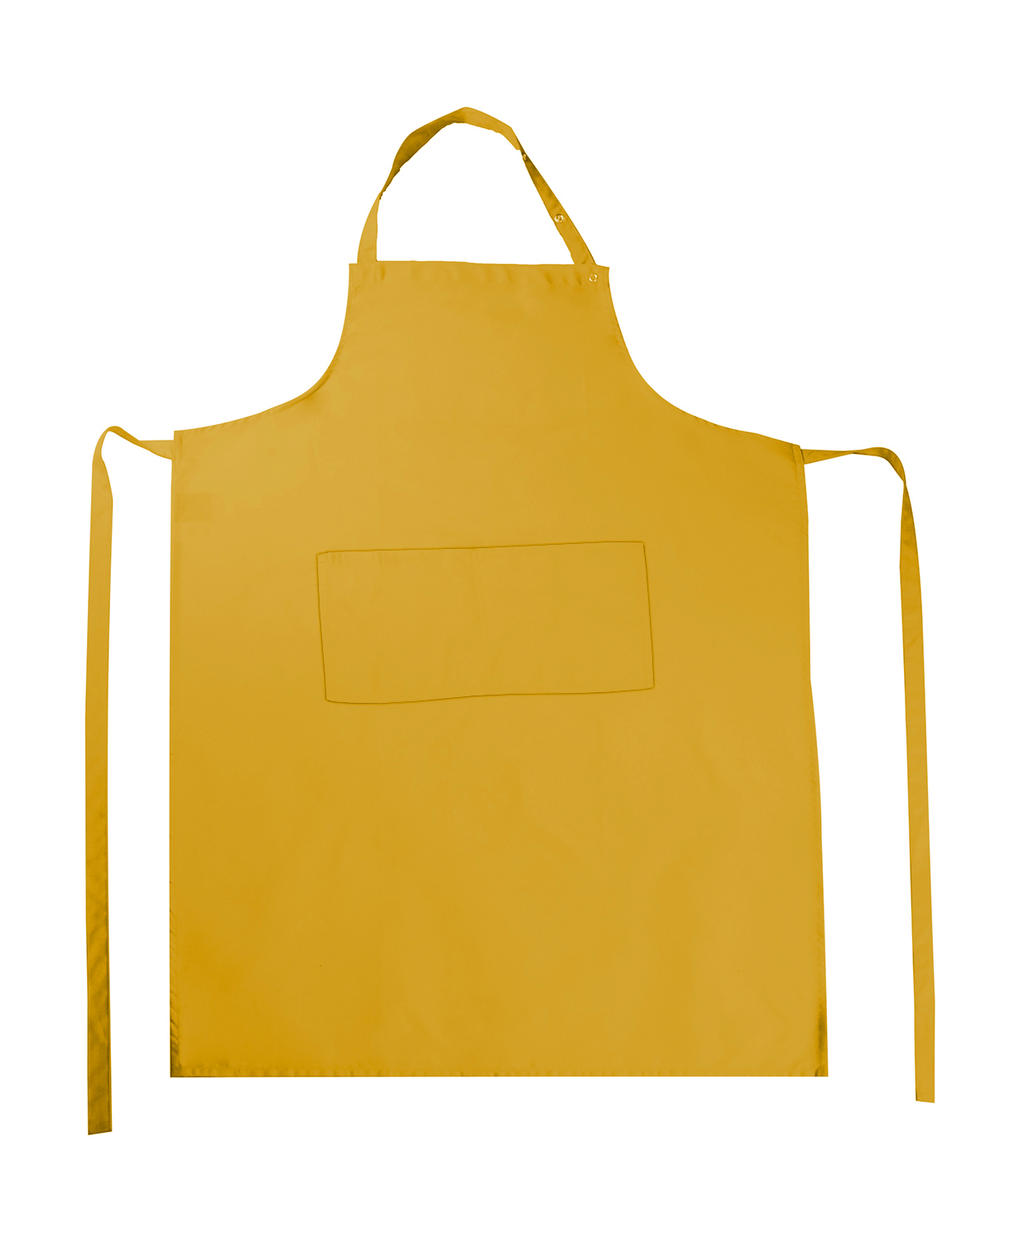  Amsterdam Bib Apron with Pocket in Farbe Sunflower